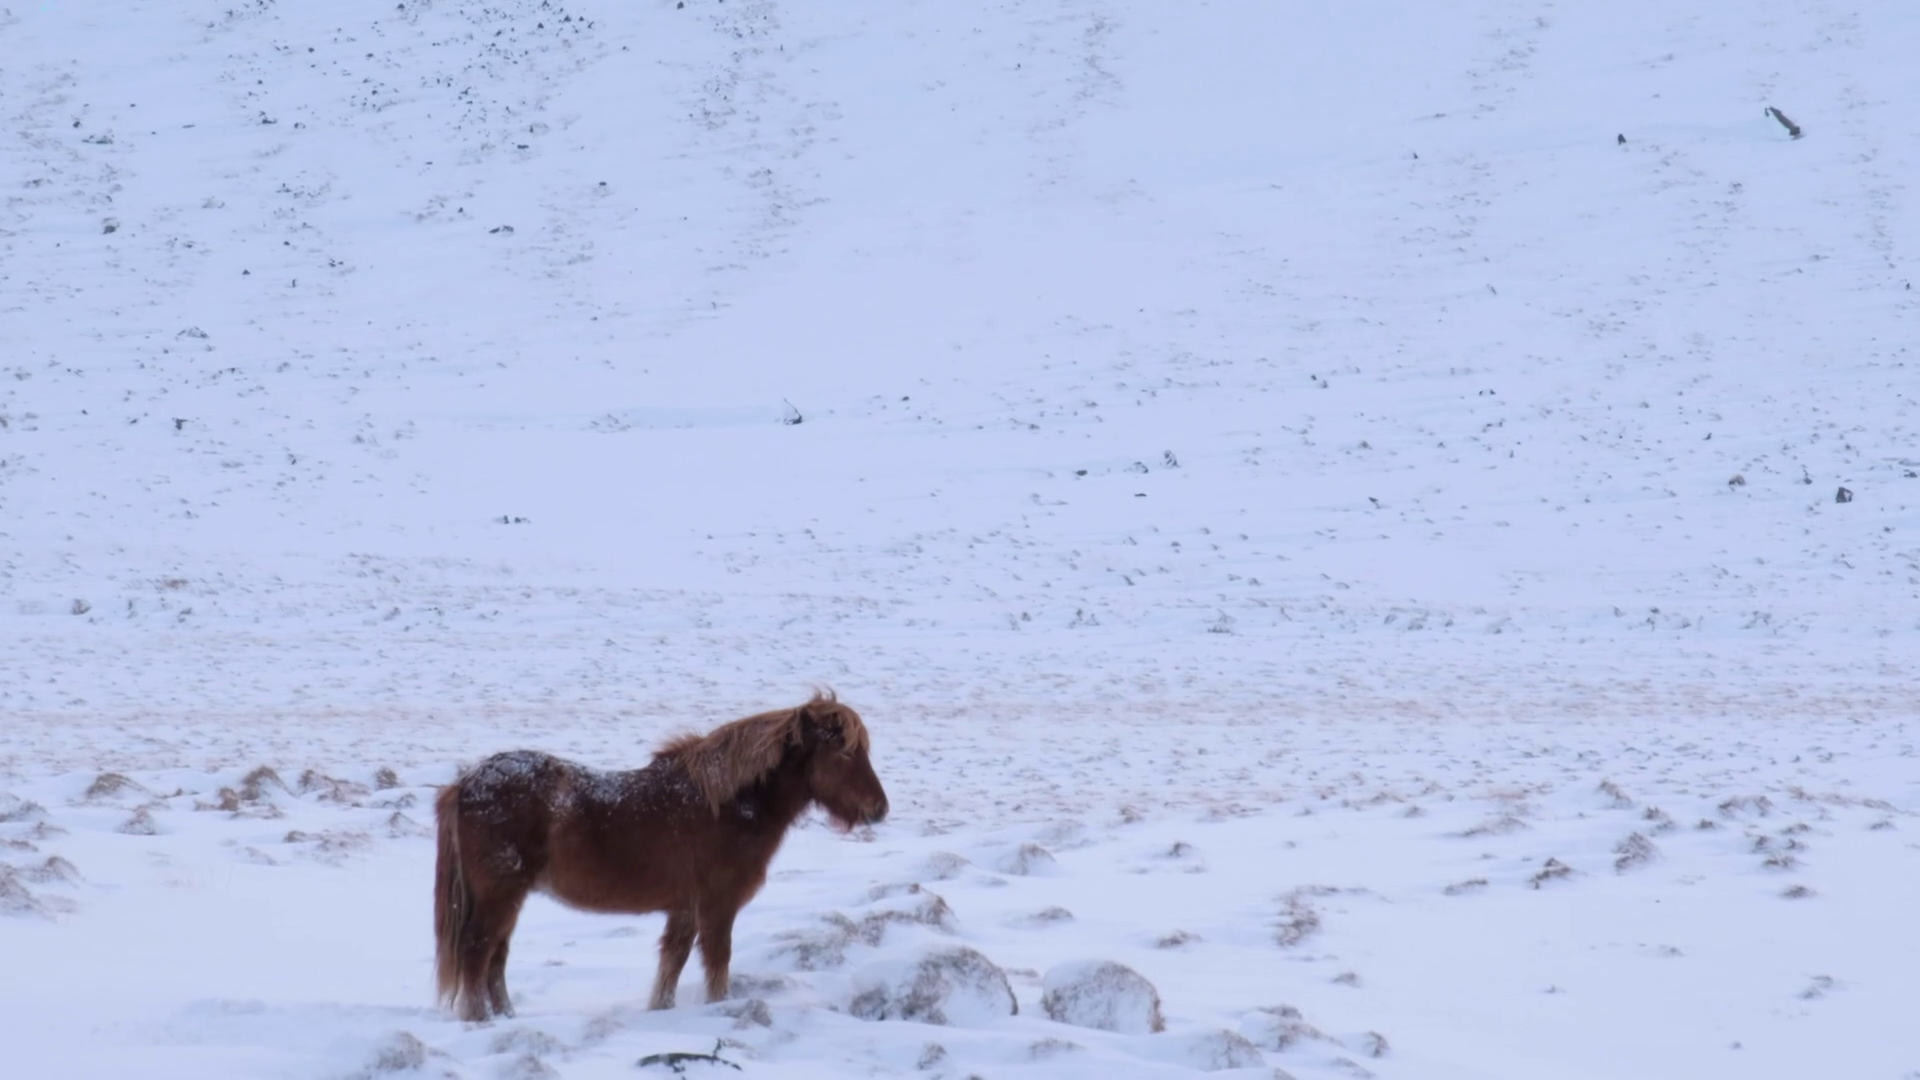 Typical Icelandic hairy horse grazing in snow blizzard. Iceland ...